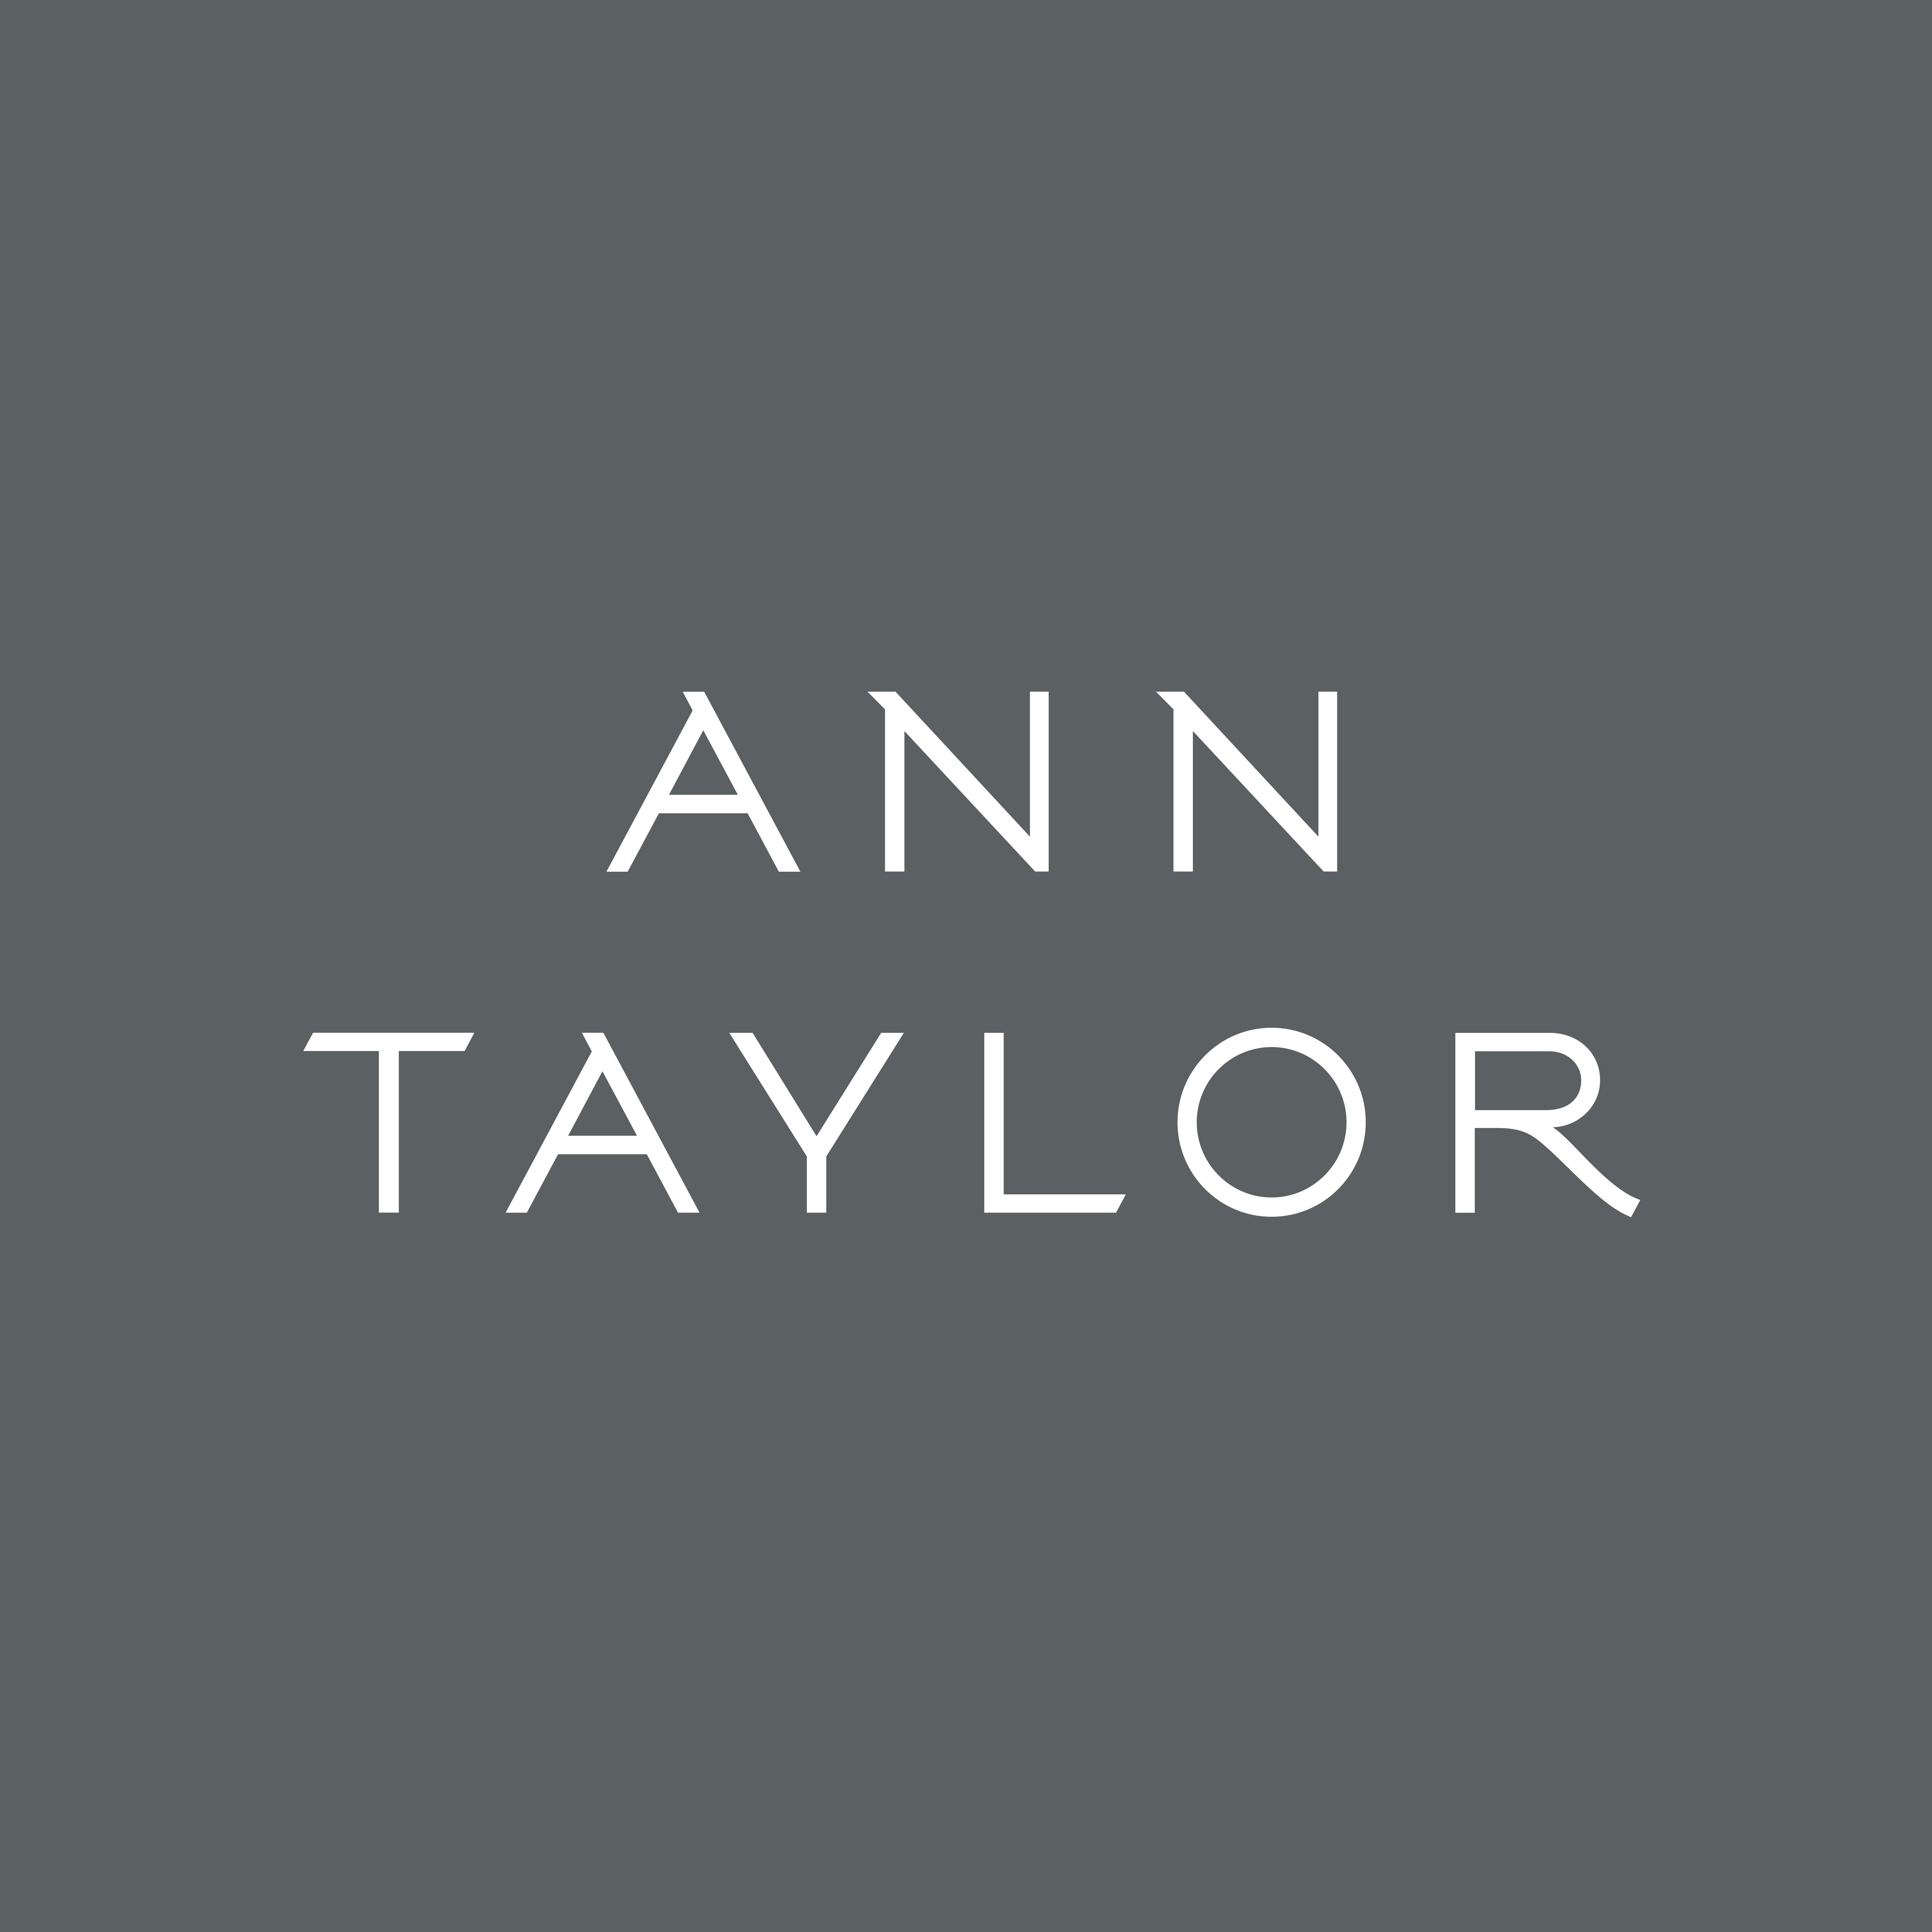 Ann Taylor Old Orchard Women S Clothing Suits Dresses Cashmere Sweaters Petites In Skokie Il [ 5000 x 5000 Pixel ]